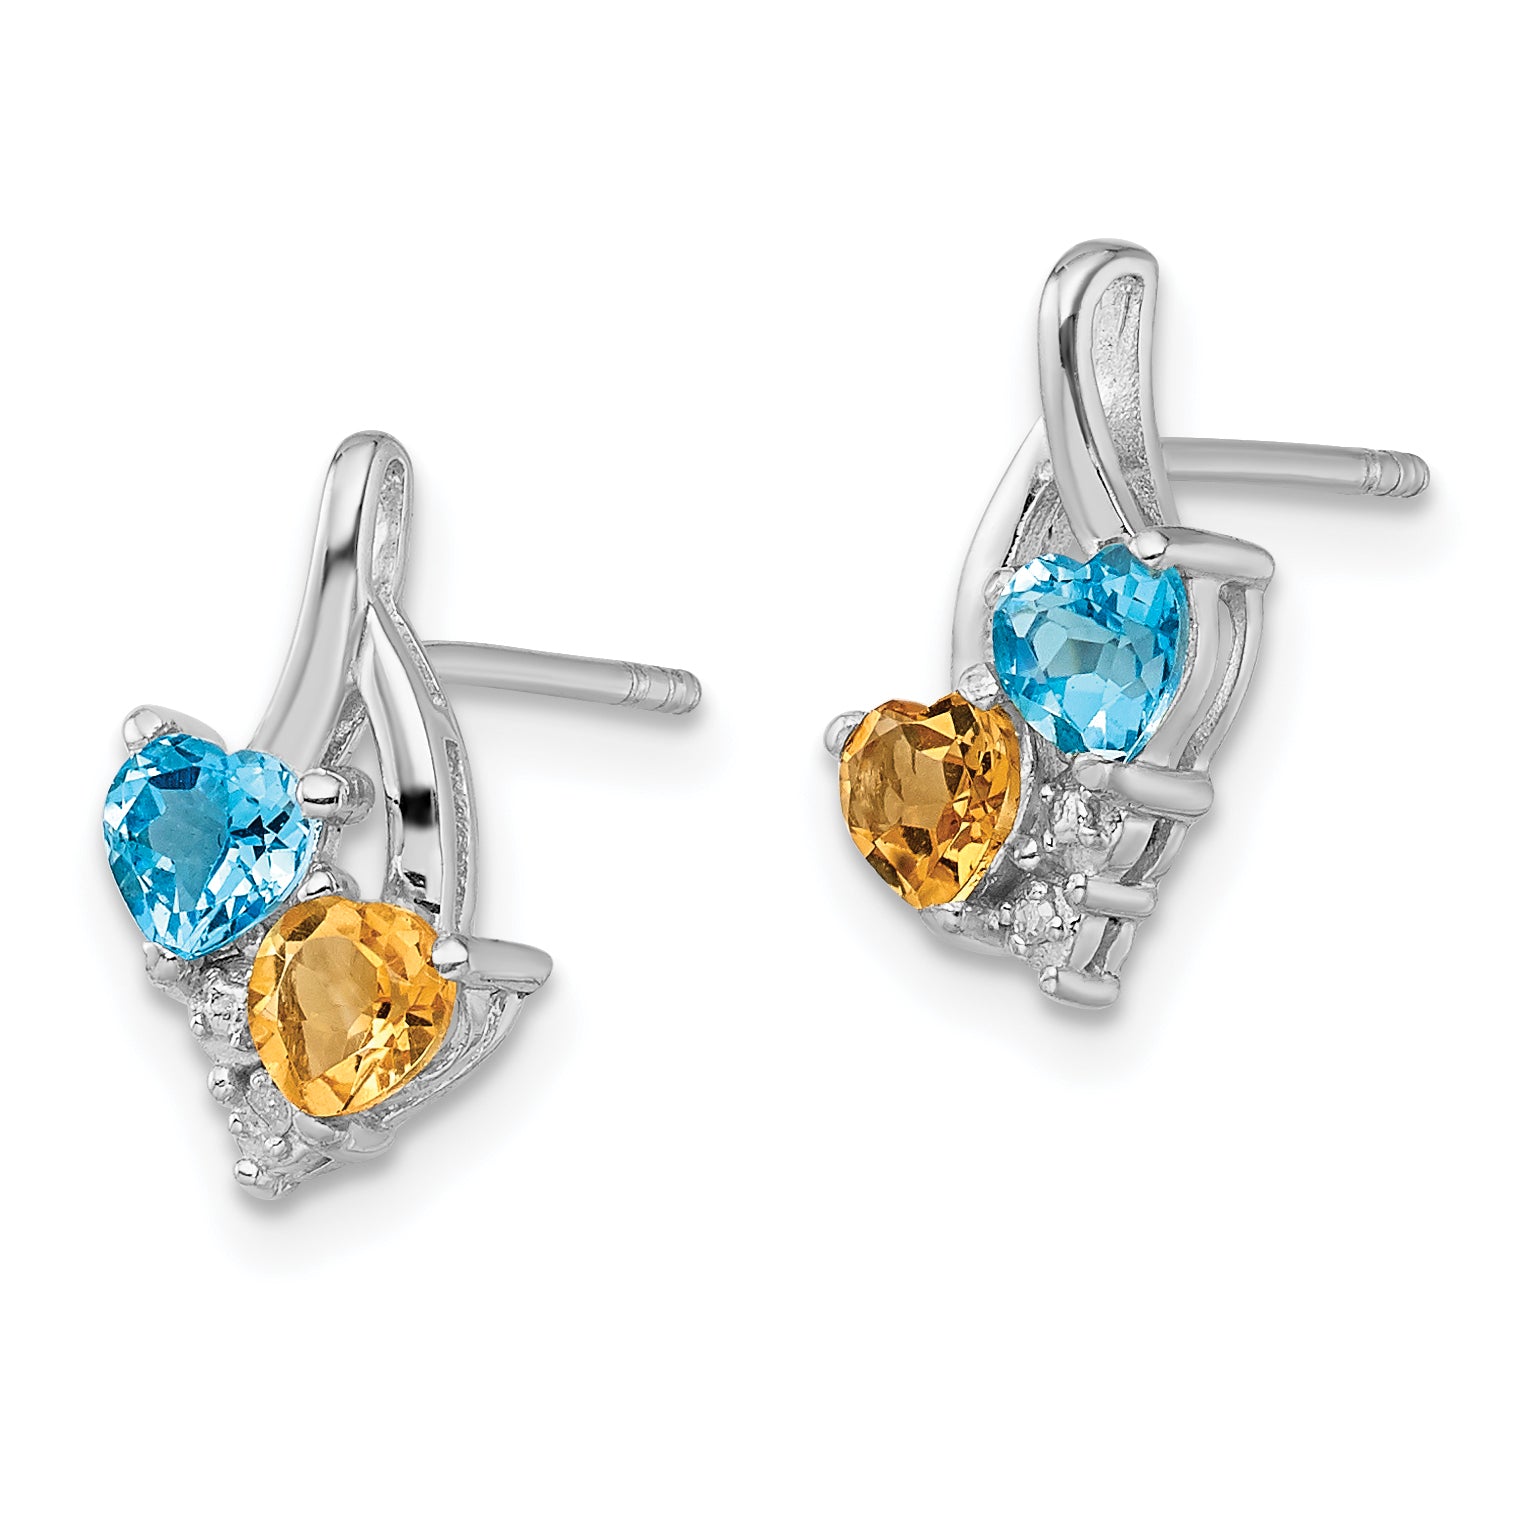 Sterling Silver Rhodium-plated Blue Topaz and Citrine Diamond Earrings